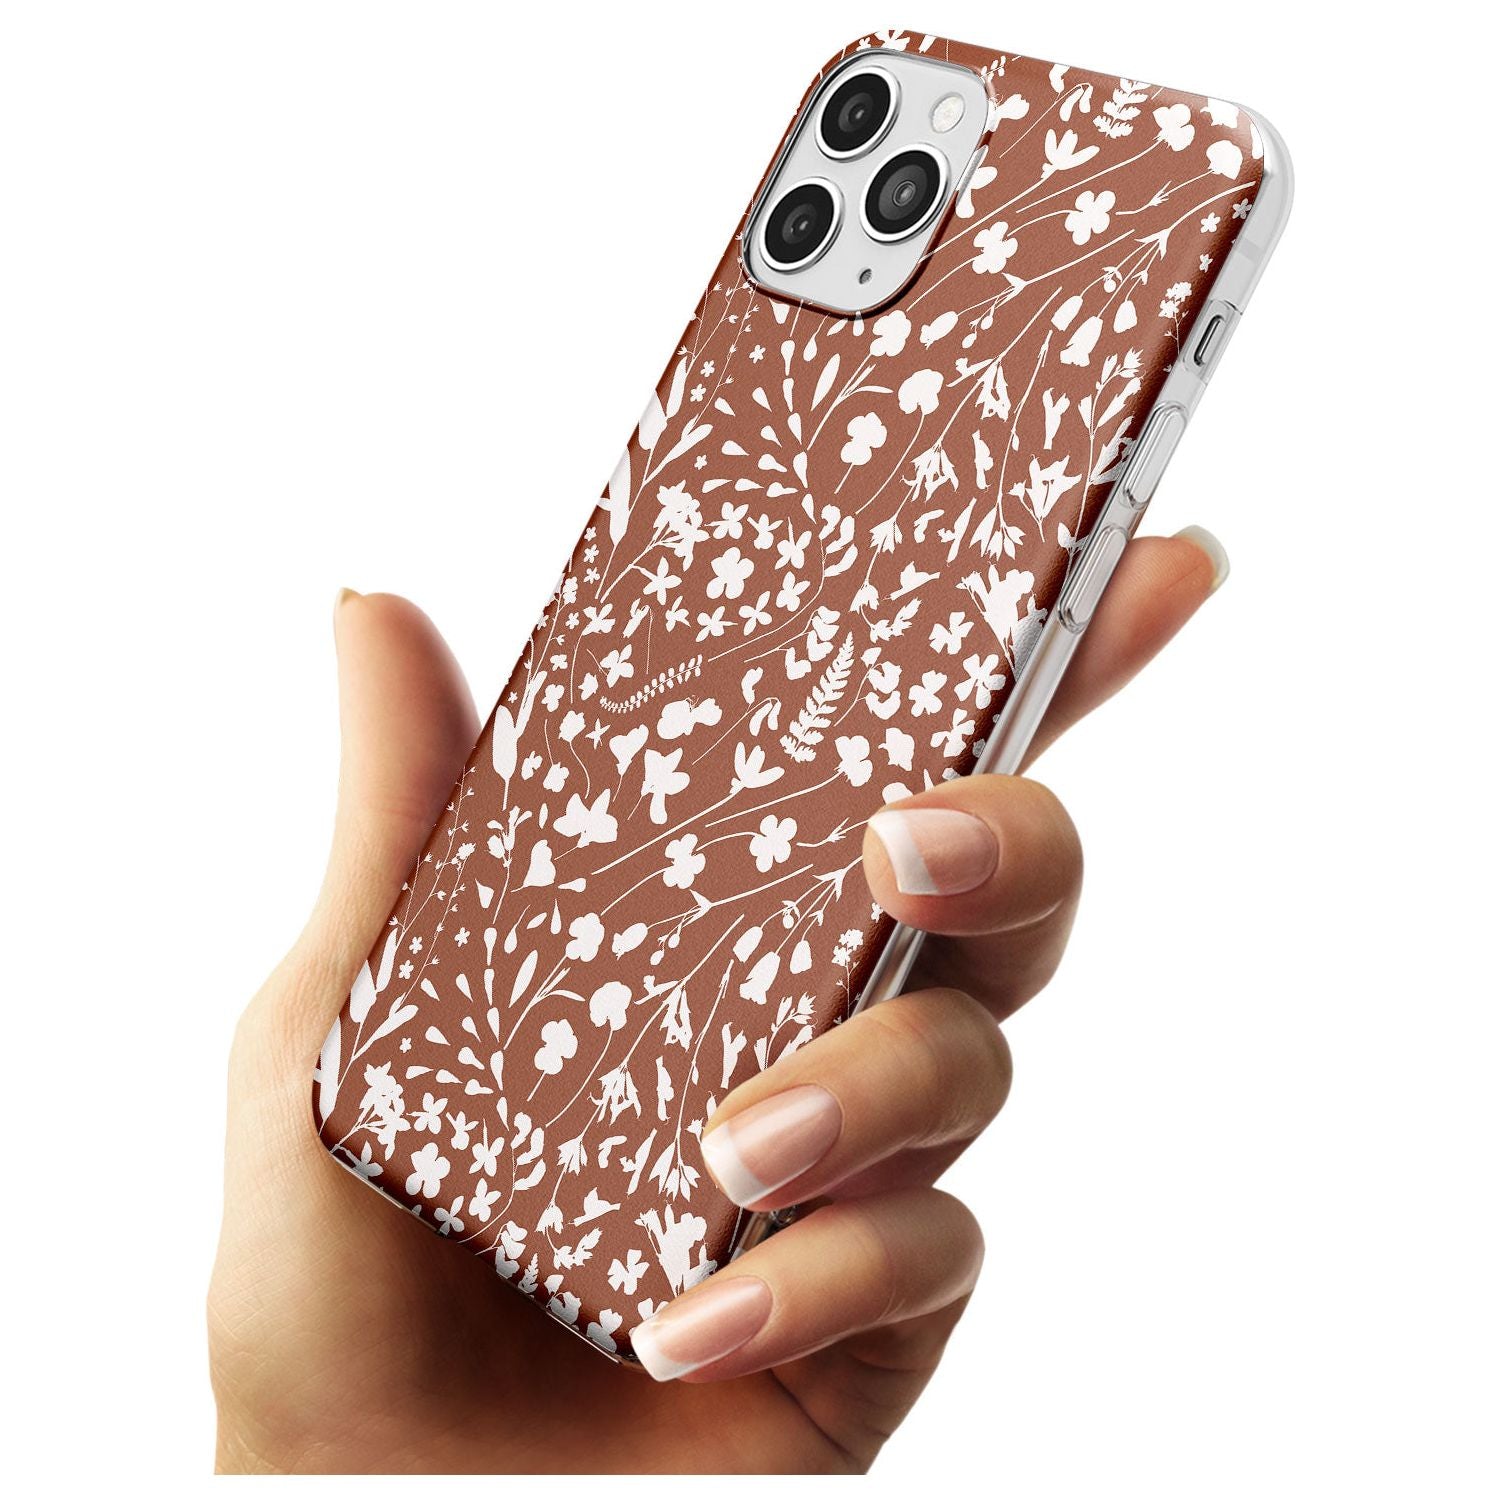 Wildflower Cluster on Terracotta Slim TPU Phone Case for iPhone 11 Pro Max